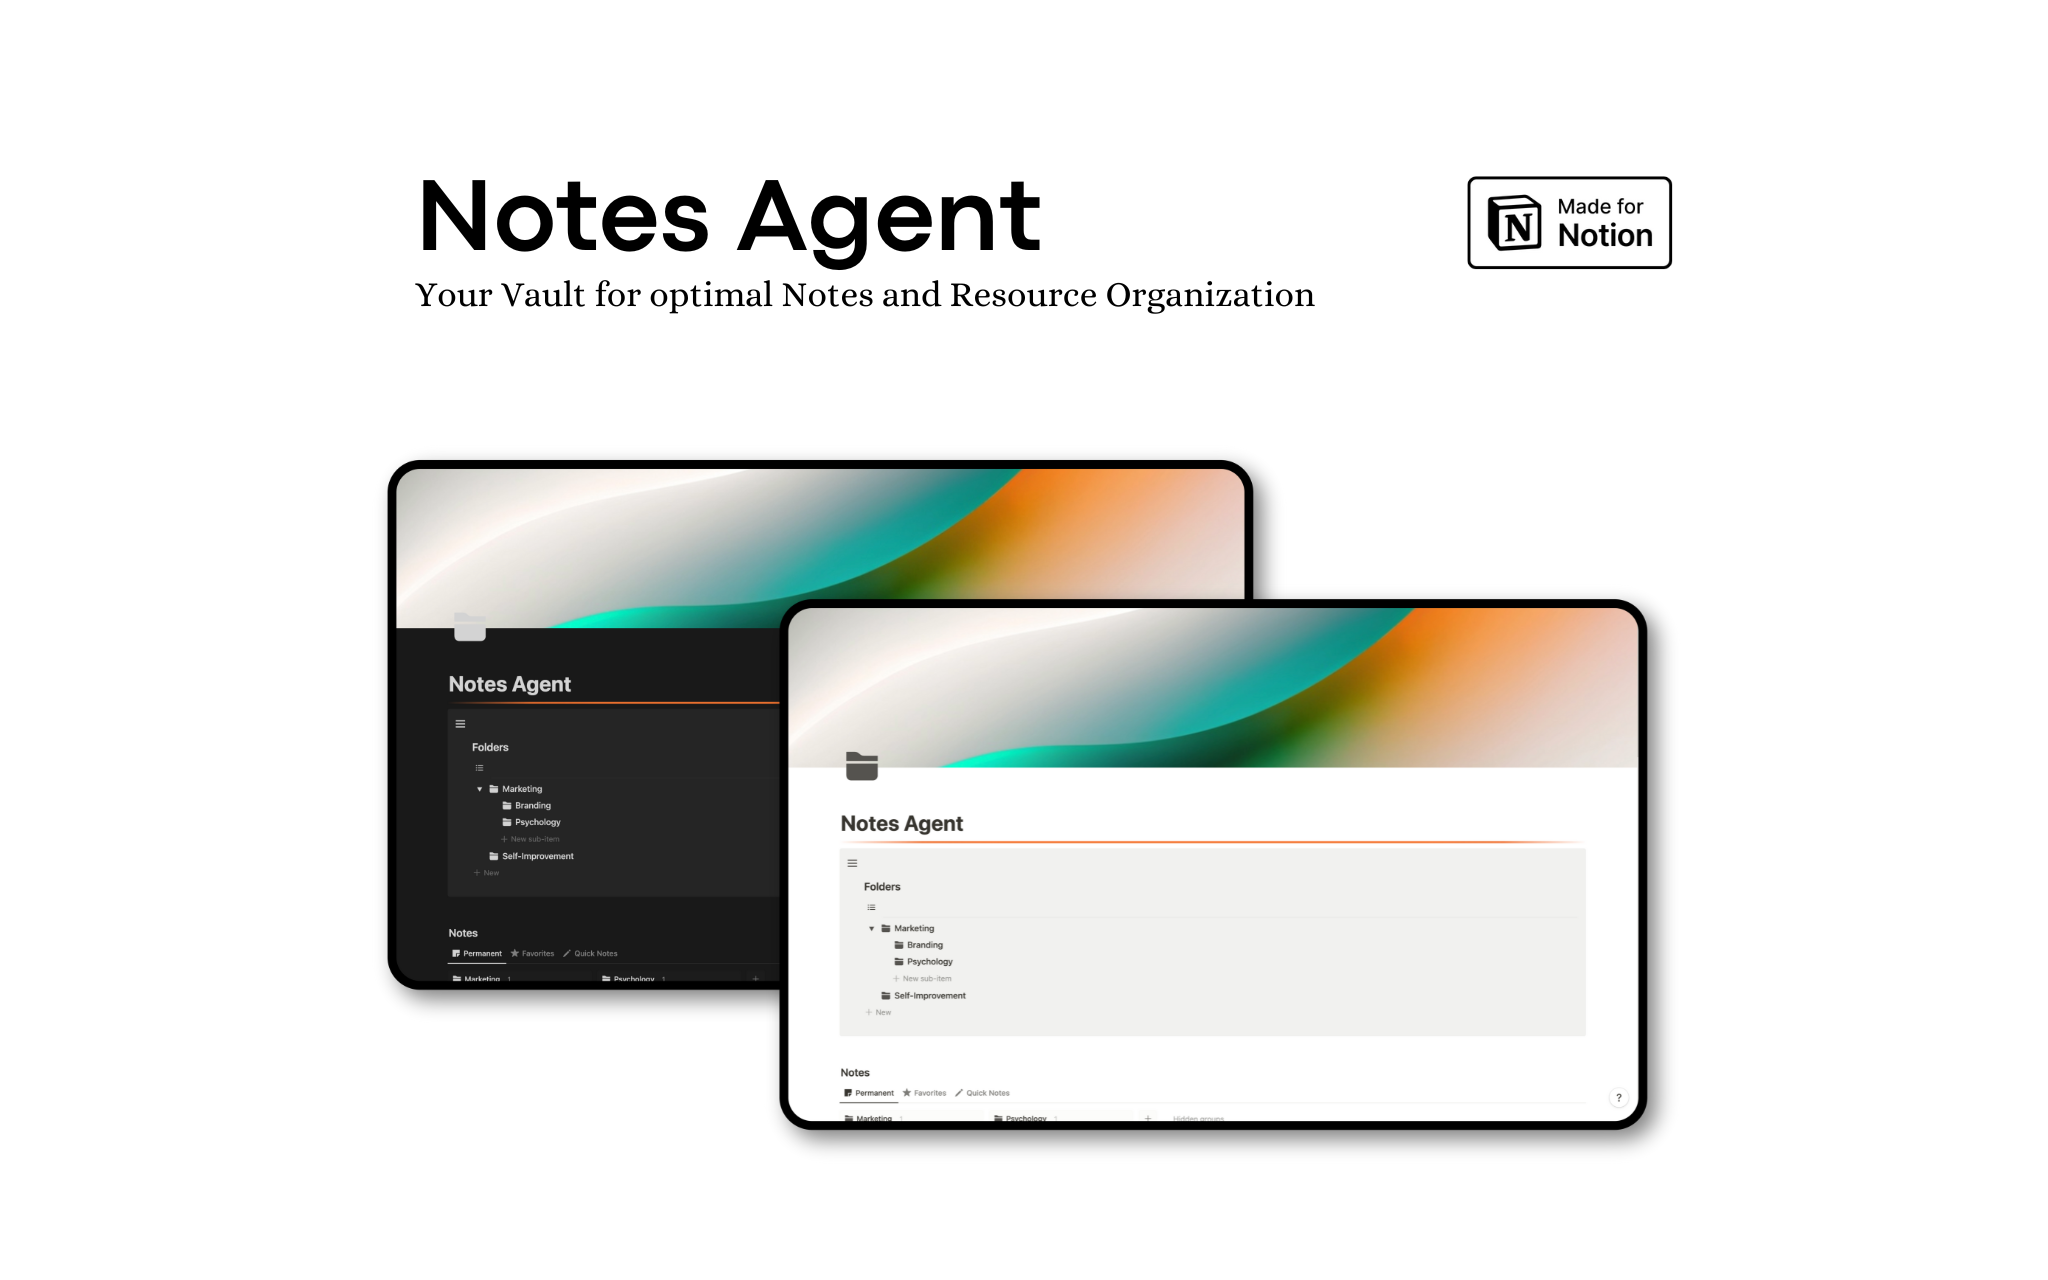 Effortlessly organize your thoughts, capture important insights, and build a knowledge repository with our Notes Agent Template. Streamline your note-taking process and unlock your creative potential.